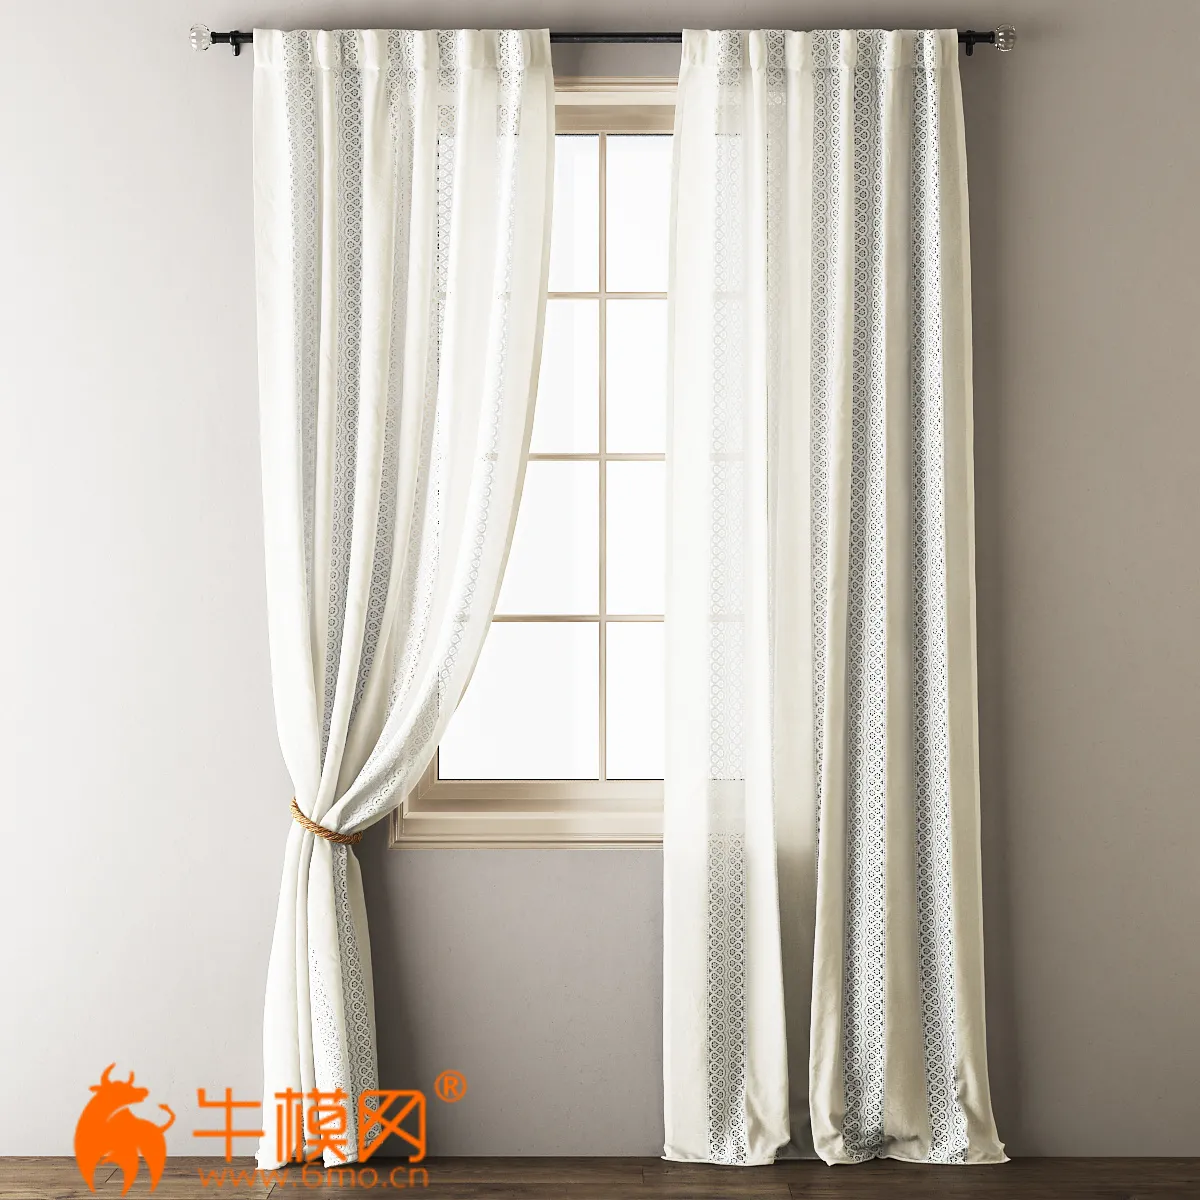 Anthropologie Lace Curtains (max 2011, fbx) – 4497